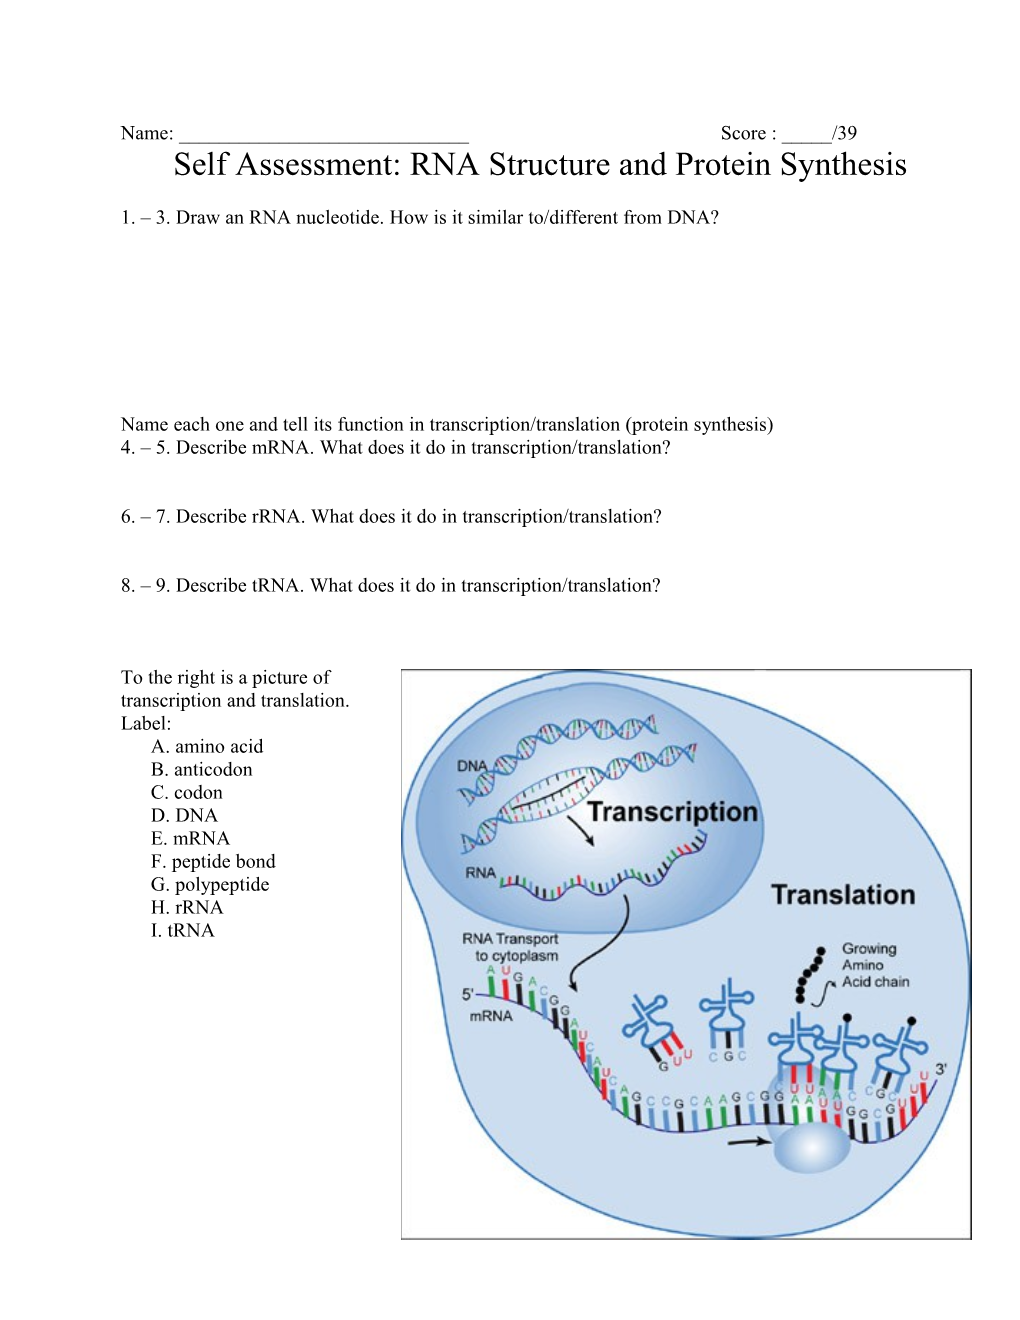 Self Assessment: RNA Structure and Protein Synthesis